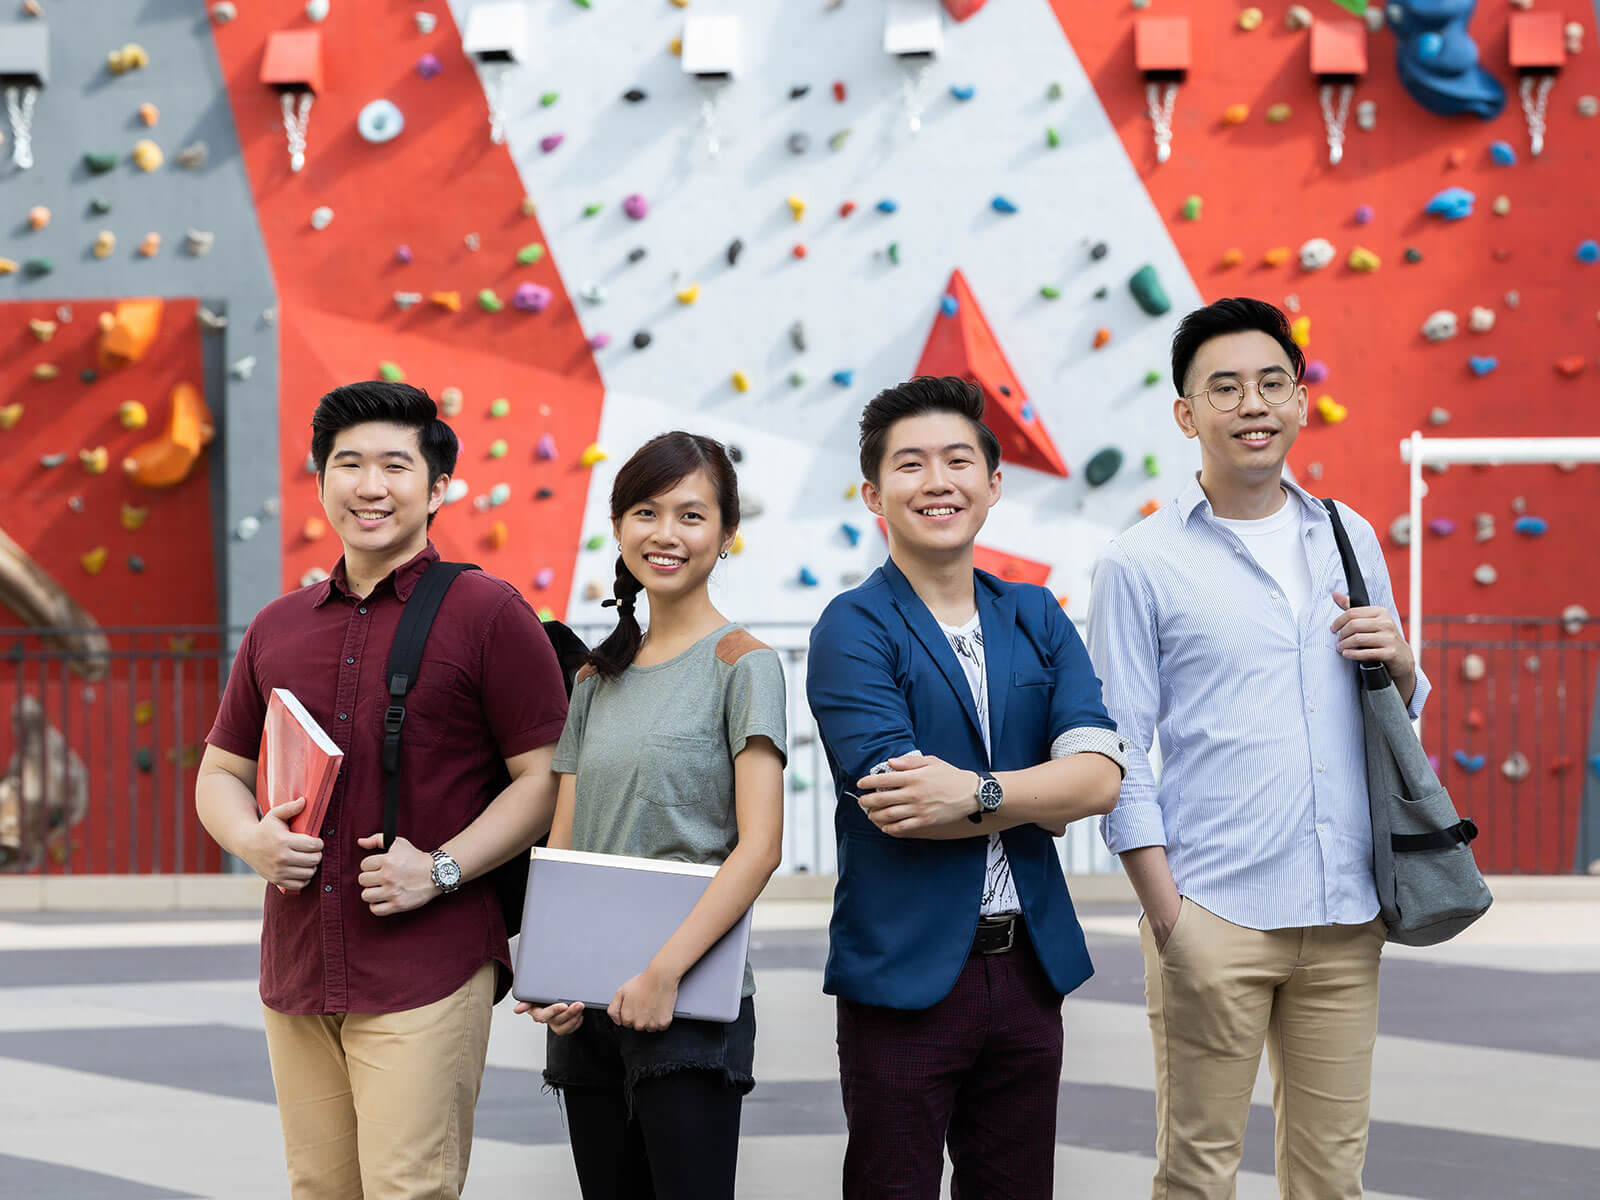 Four DigiPen (Singapore) students pose in front of a rock climbing wall